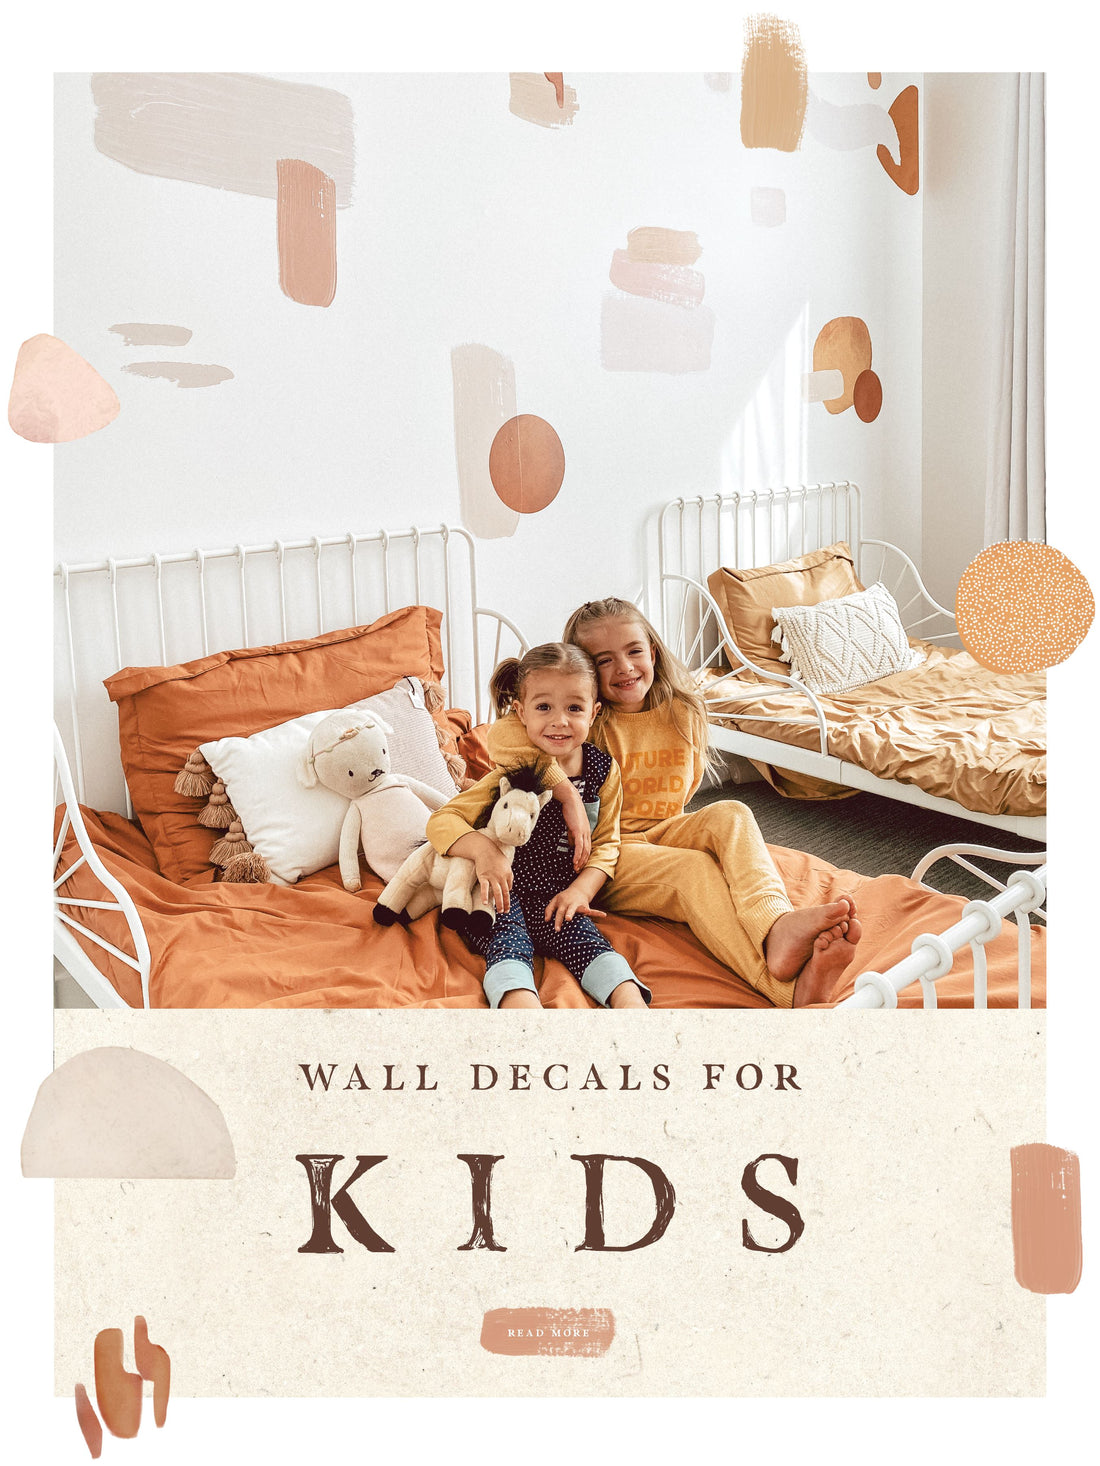 Wall Decals for Kids’ Rooms